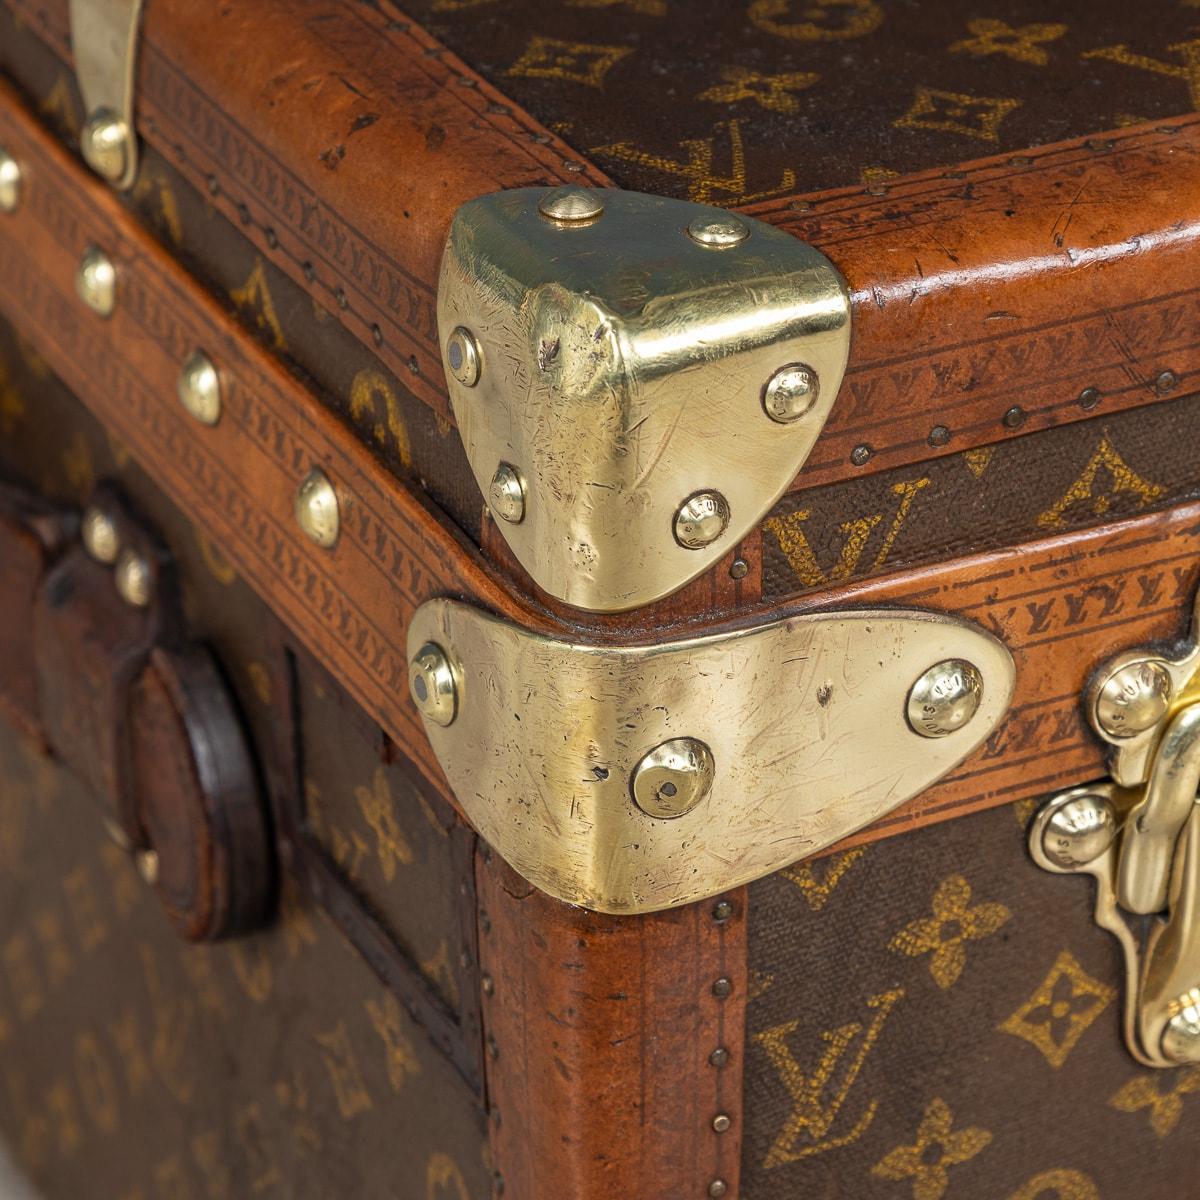 20th Century Louis Vuitton Cabin Trunk In Monogram Canvas, France c.1930 For Sale 9